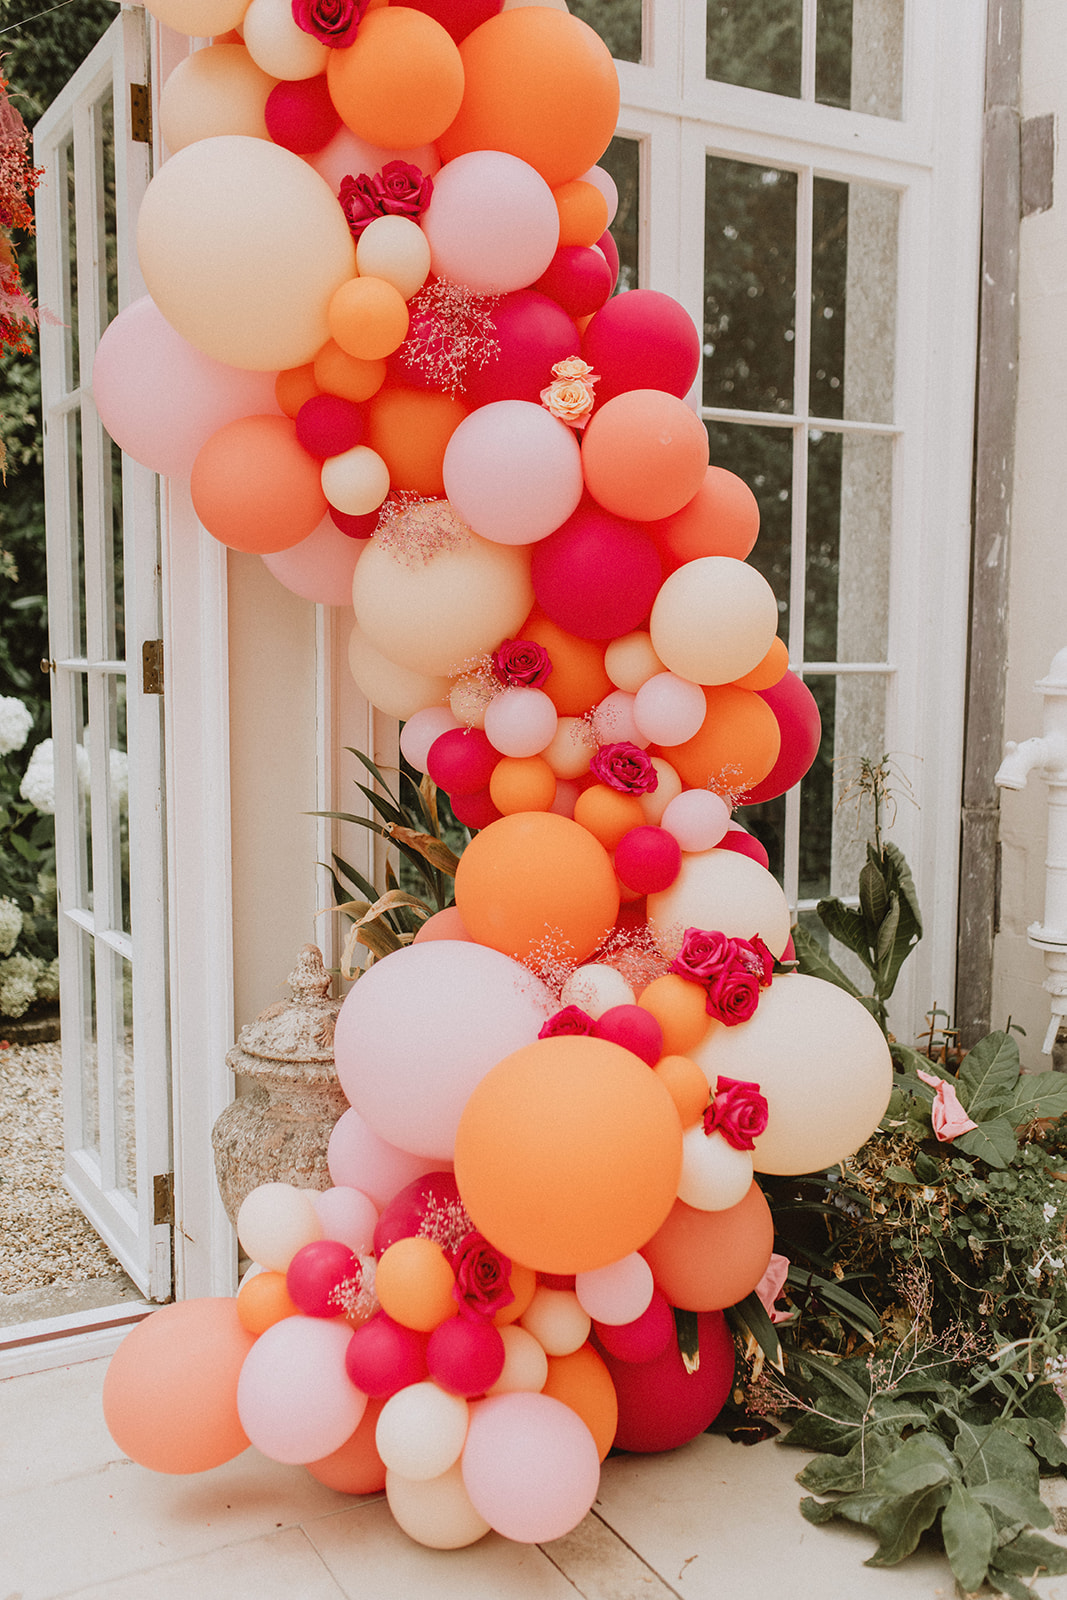 balloon installation for wedding at came house